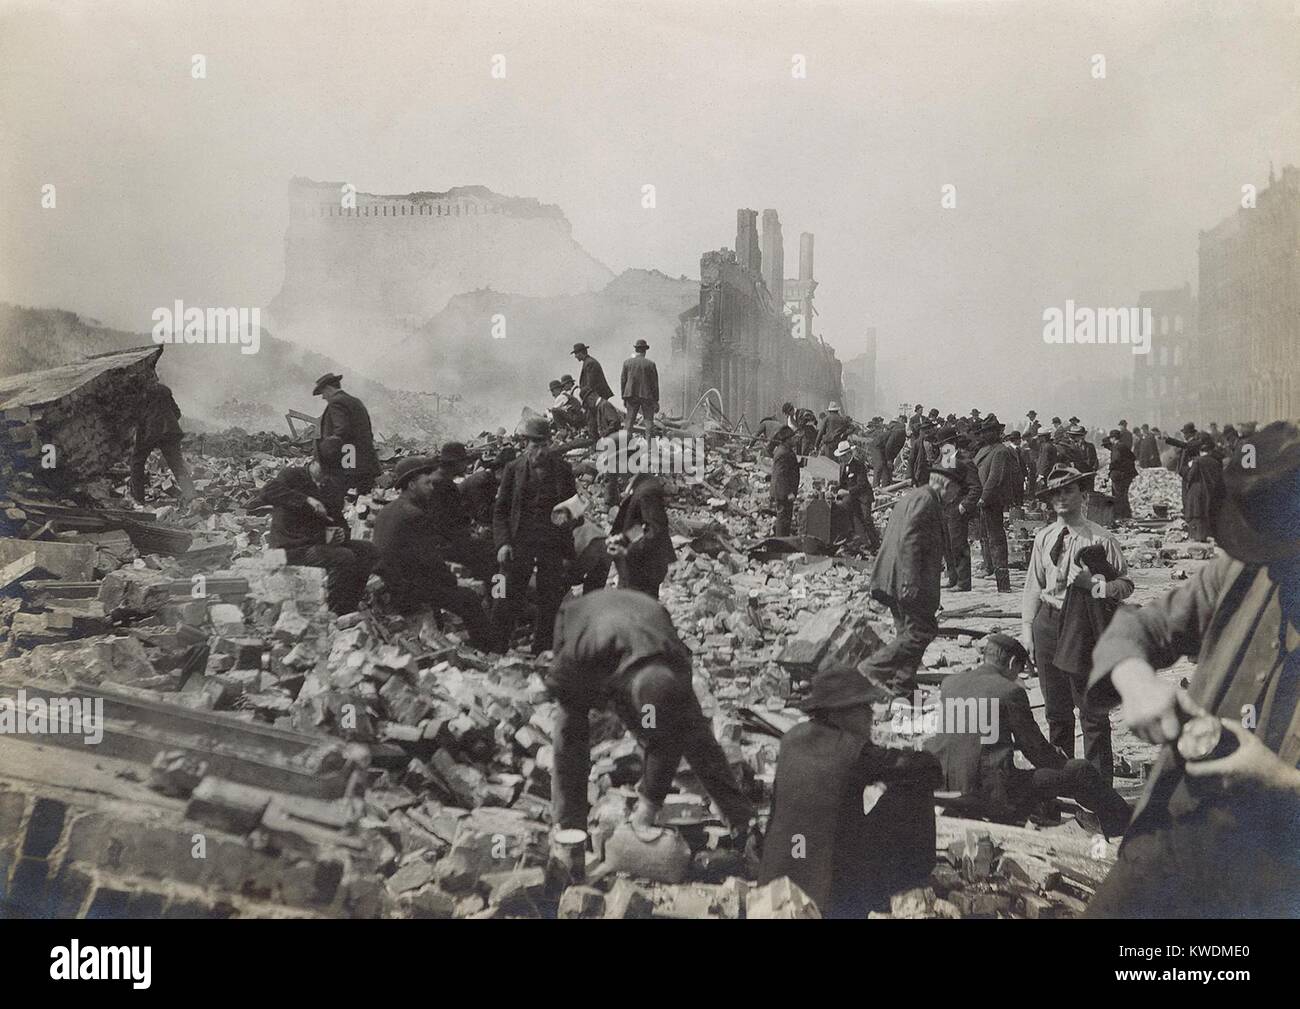 Scavengers in the rubble after the April 18, 1906 San Francisco Earthquake and 3-day fire. A few men appear to be opening tin cans, probably of food found in the ruins (BSLOC 2017 17 30) Stock Photo